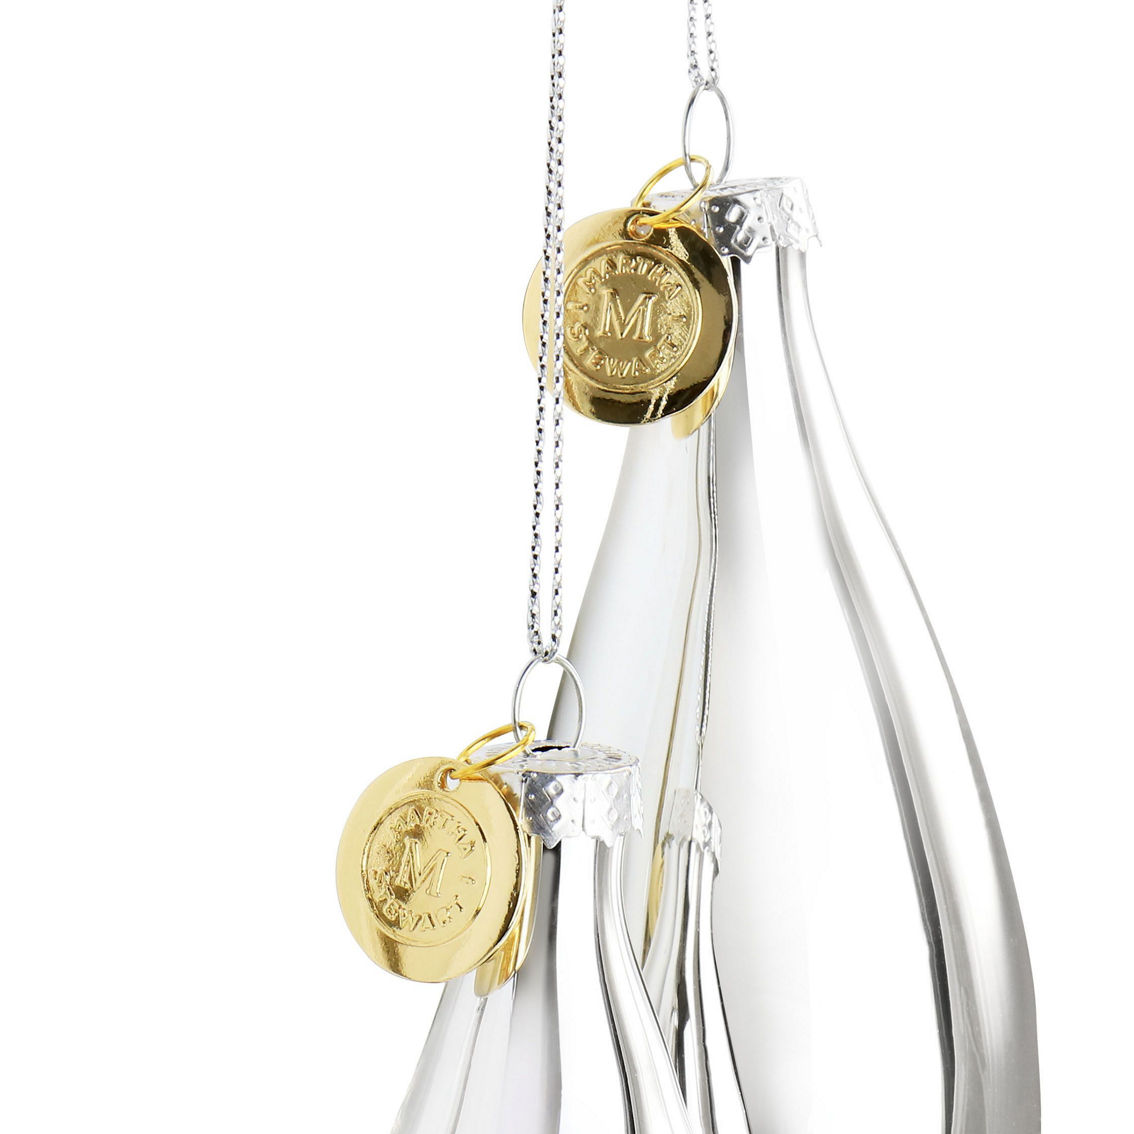 Martha Stewart Holiday Double Pointed 3 Piece Ornament Set in Silver - Image 3 of 4